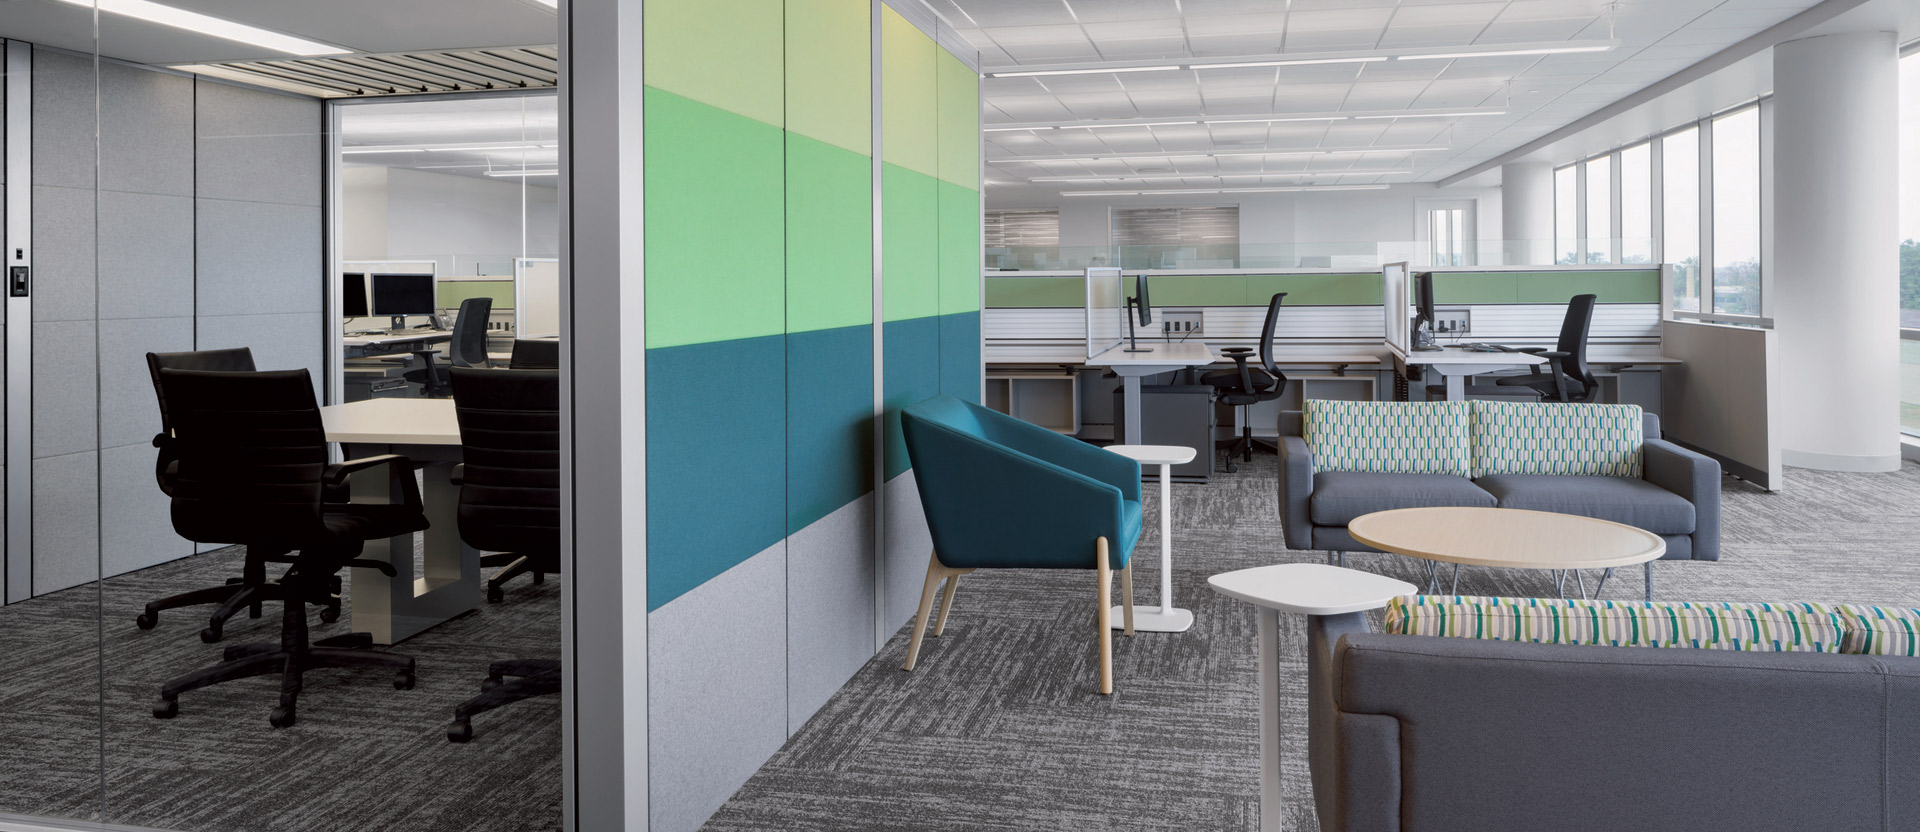 Open-plan office space featuring modular workstations with ergonomic chairs, individual privacy panels, and ambient natural lighting from floor-to-ceiling windows. A casual seating area introduces vibrant upholstery, complementing the space's contemporary, collaborative atmosphere.